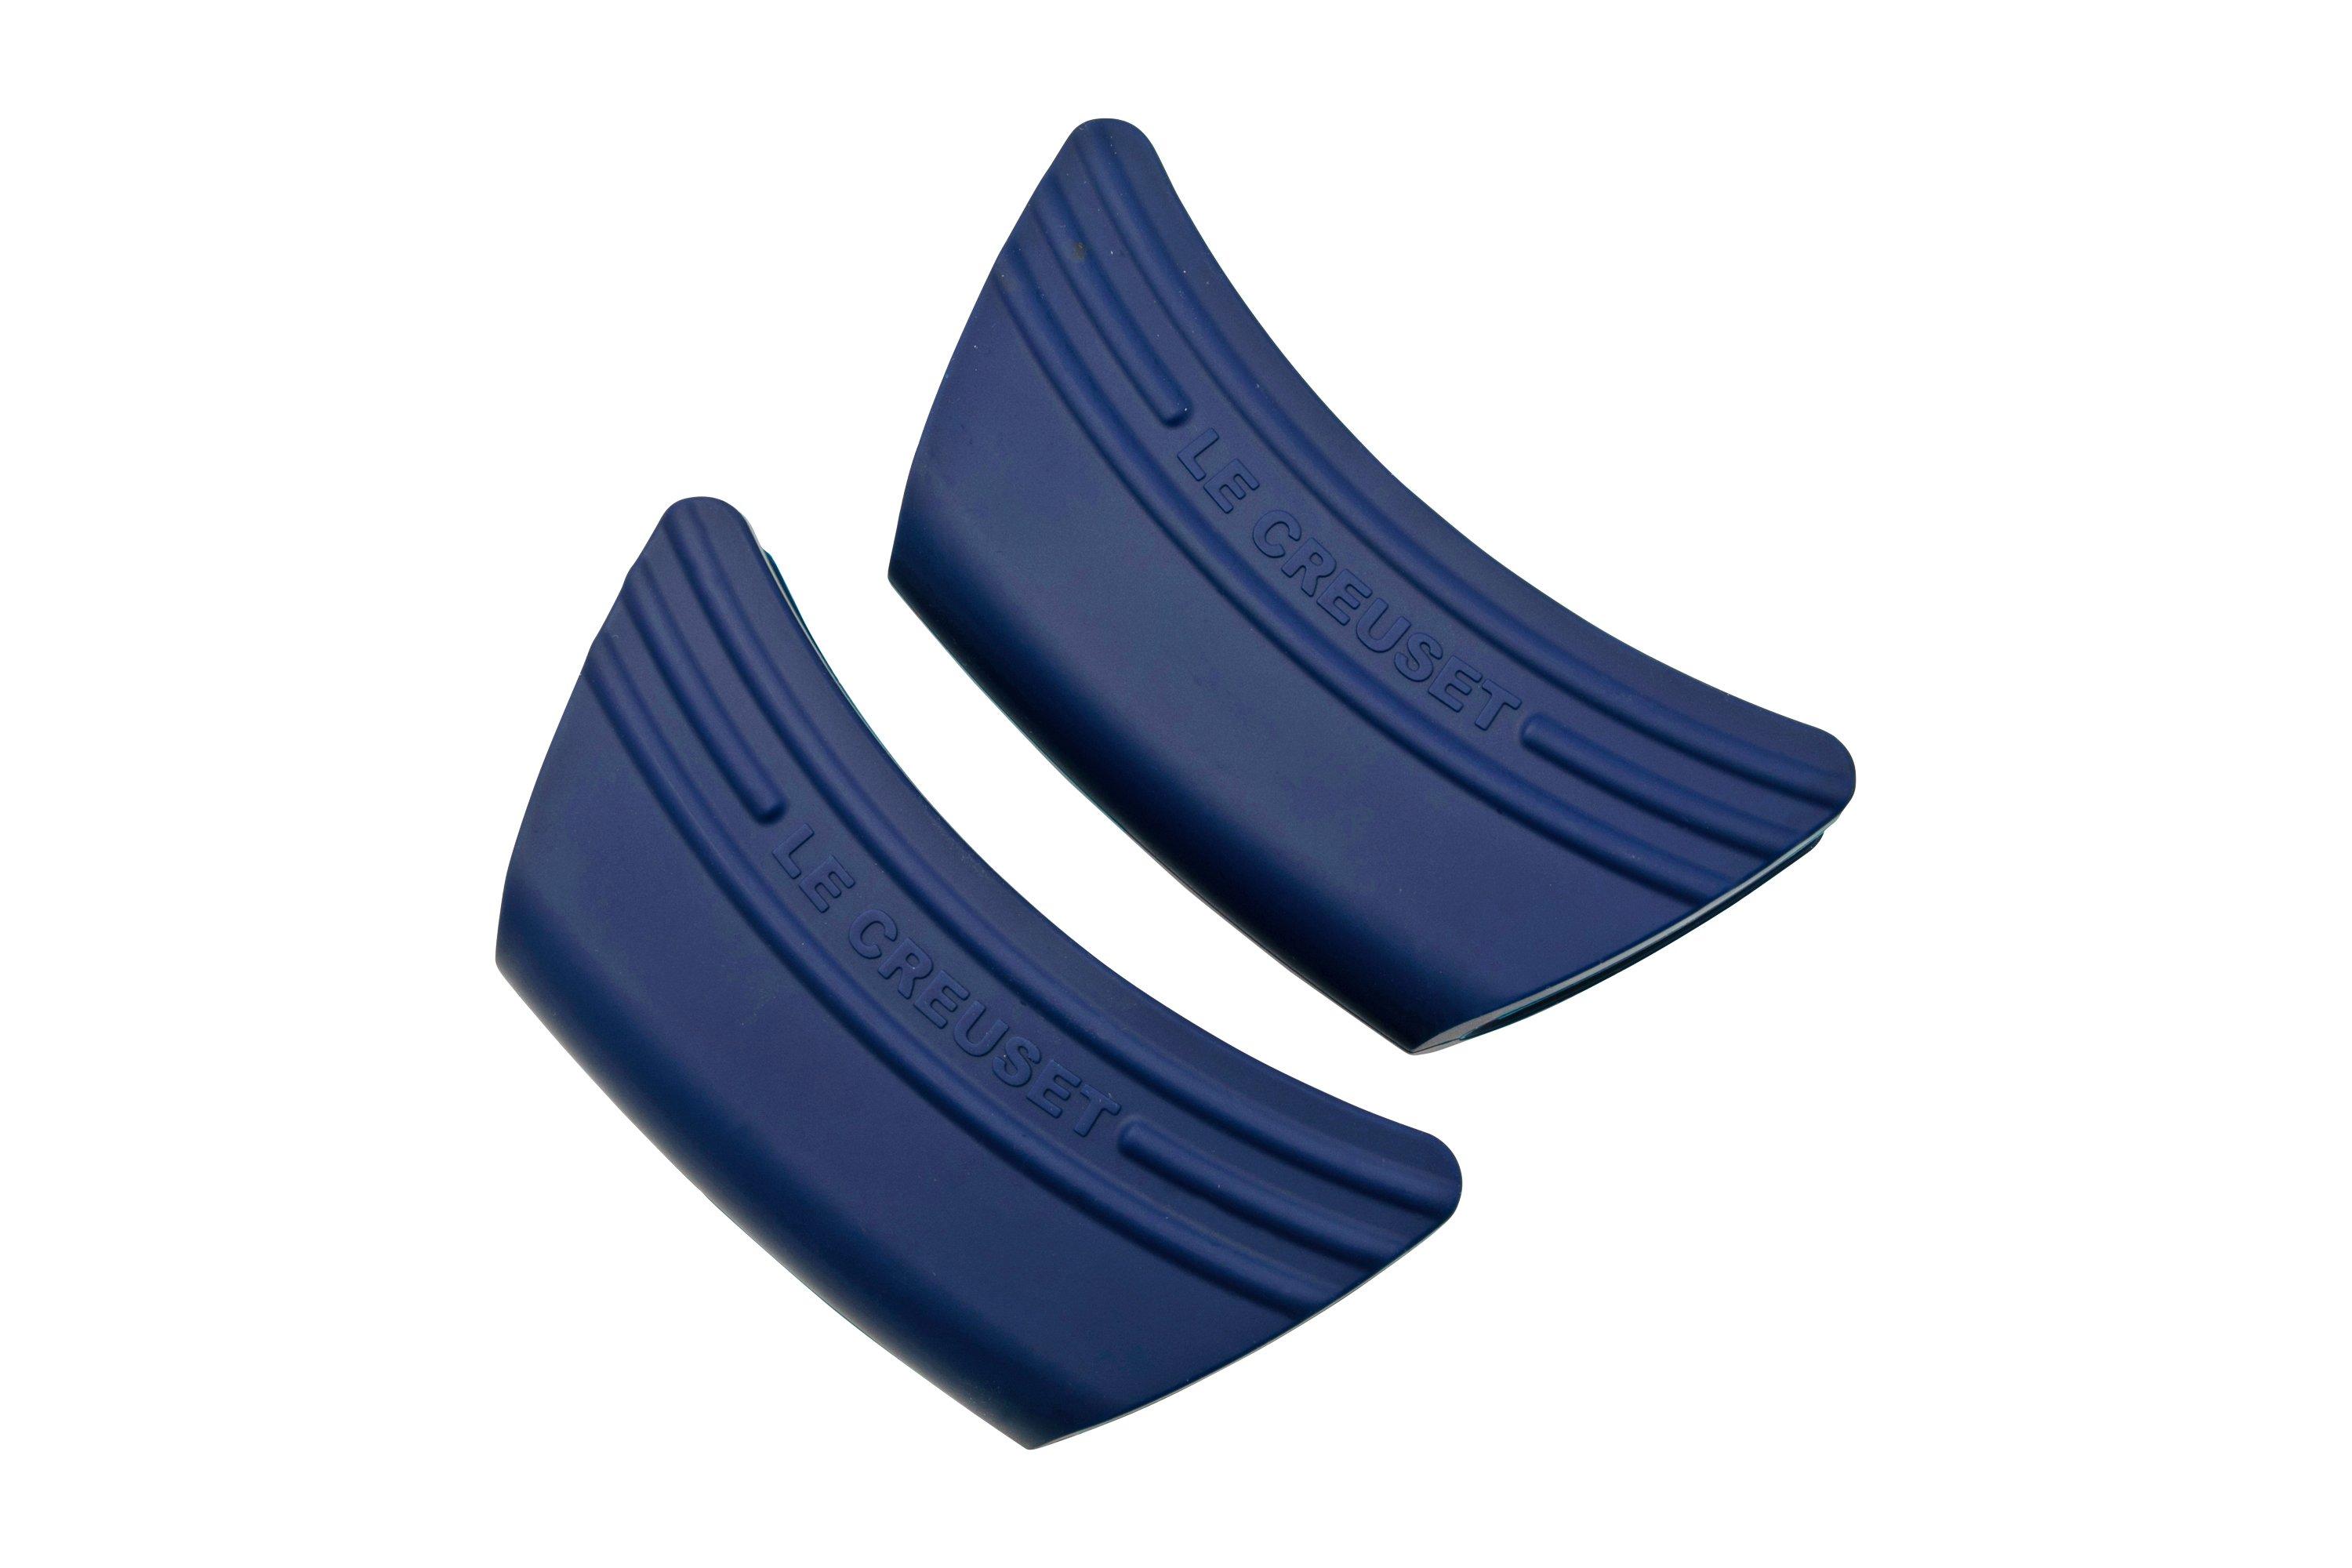 Le Creuset Silicone Set of 2 Handle Grips, 5 x 2 1/2 each, Oyster